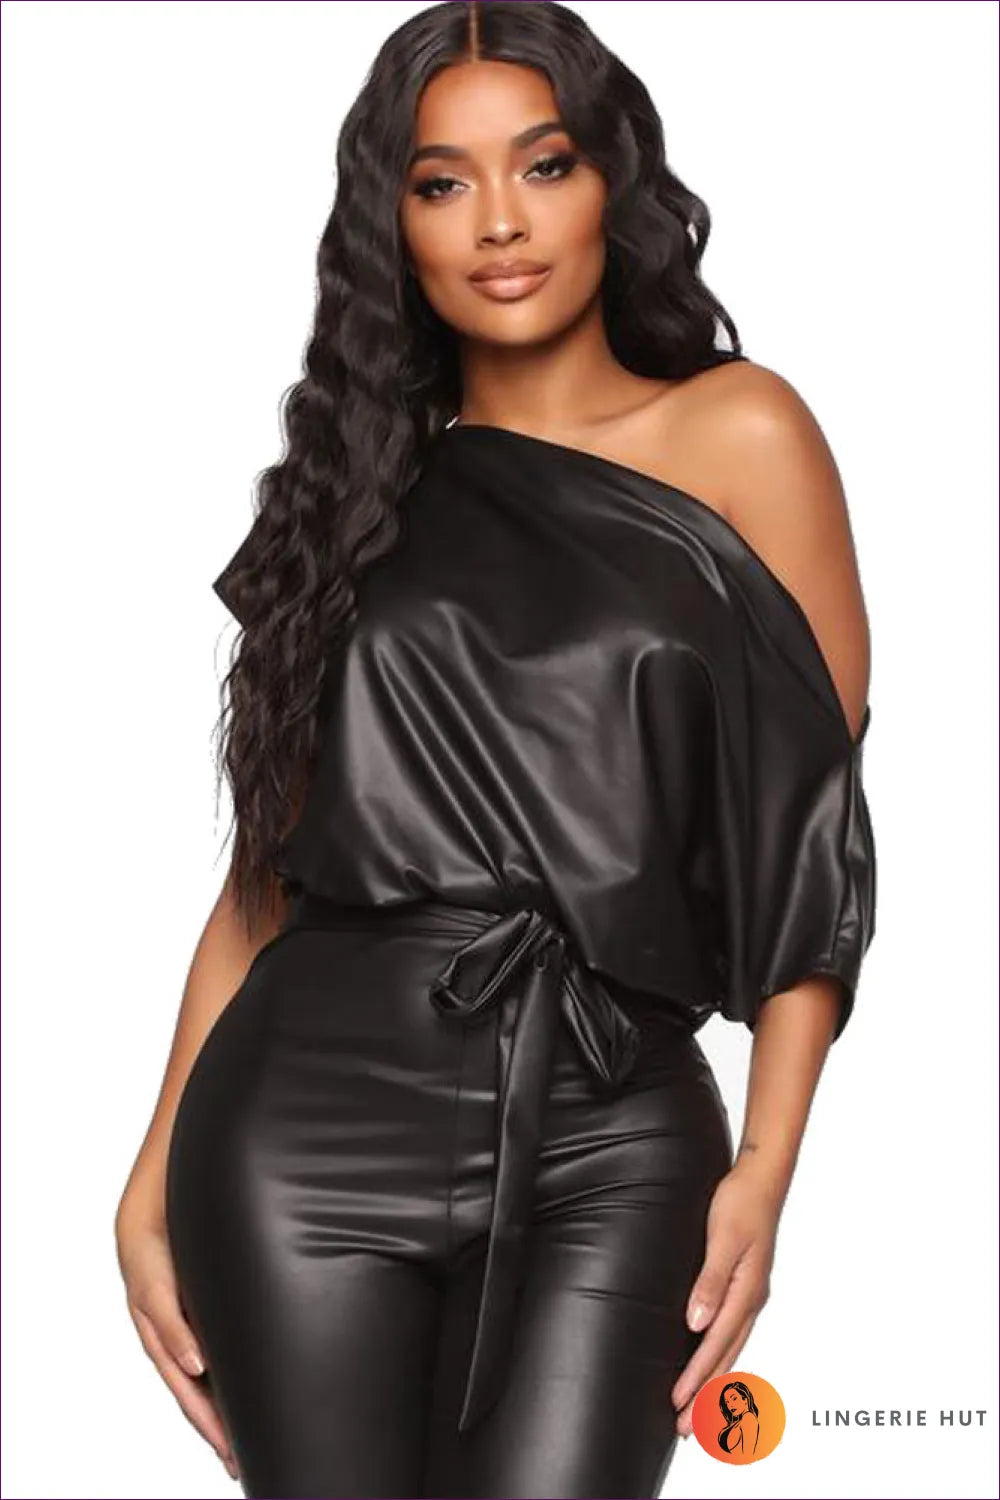 Seize The Day In Lingerie Hut’s Stretch Sexy Faux Leather Waist Slant Shoulder Lace-up Jumpsuit.